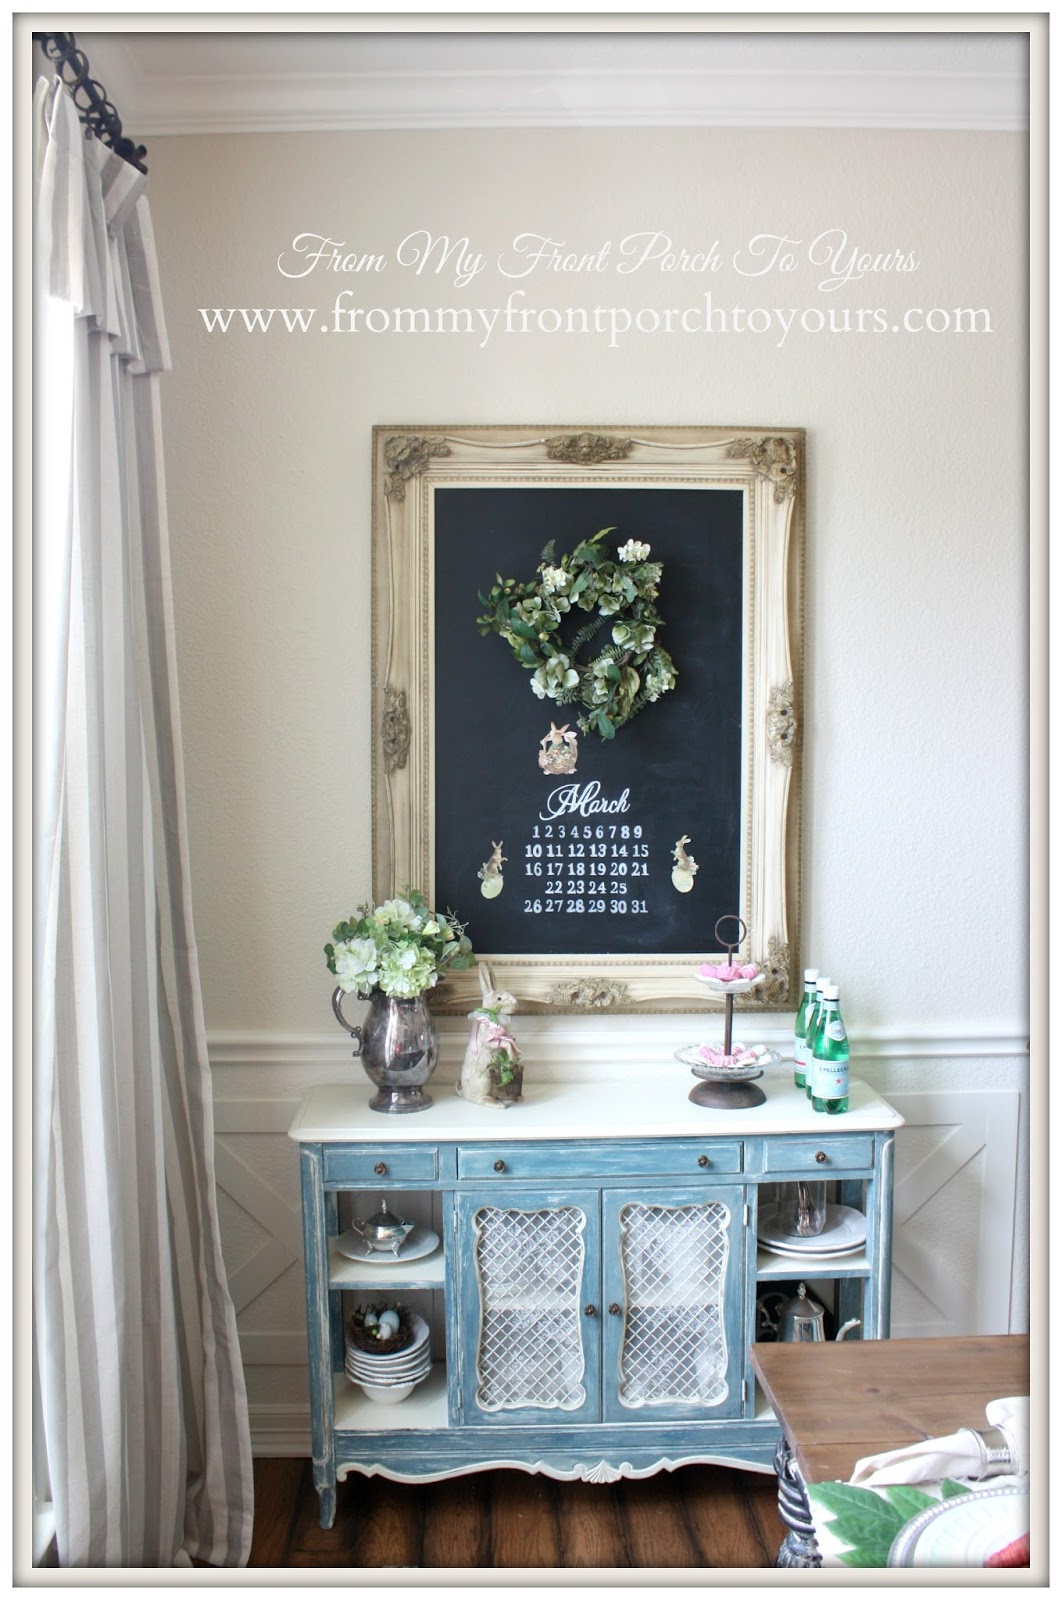 Spring Dining Room ChalkboardFrench Farmhouse Easter Dining Room-Vintage Side table- From My Front Porch To Yours